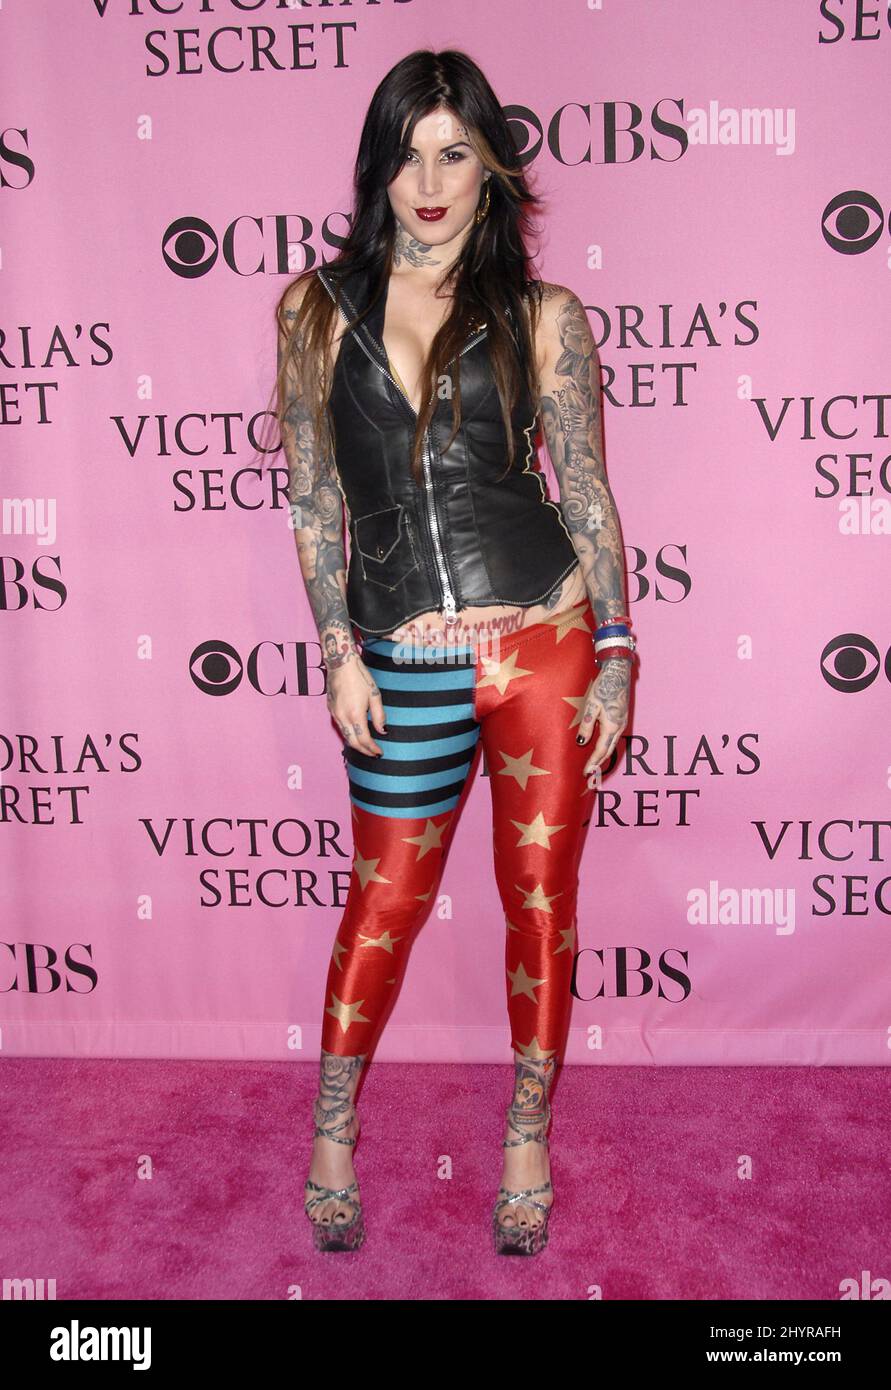 Katherine Von D arrives at the 12th Annual Victoria's Secret Fashion Show held at the Kodak Theatre in Hollywood, CA. Stock Photo